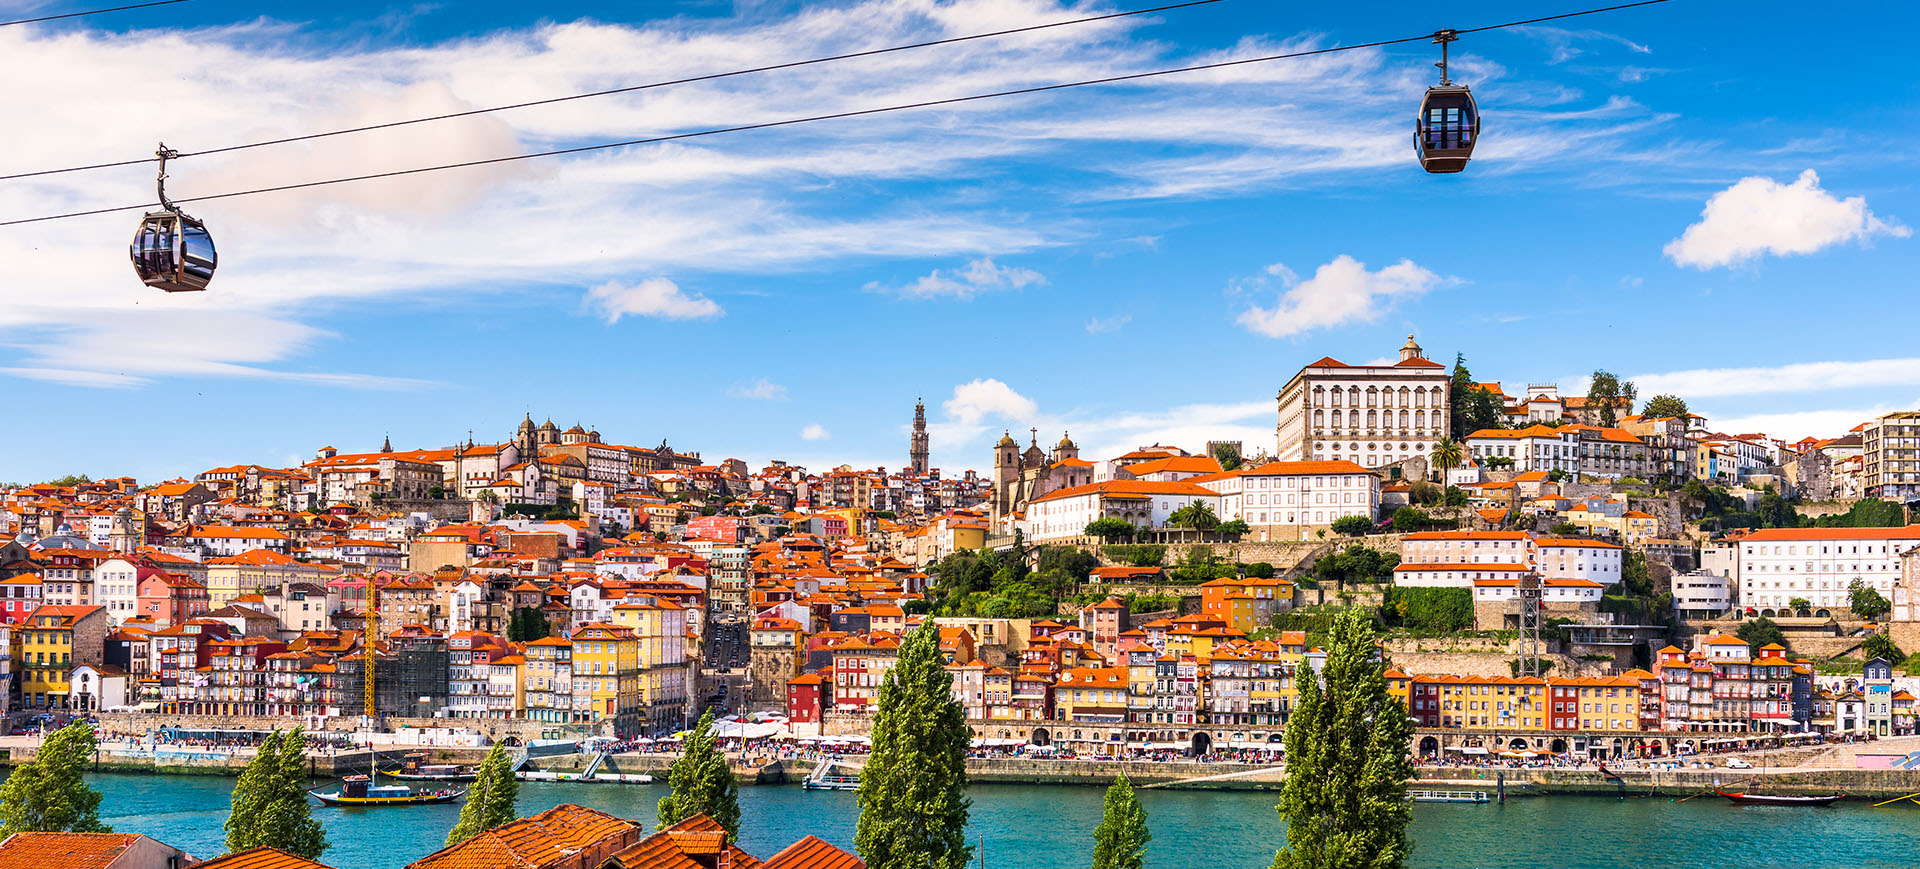 Living in Porto: the best of Portugal’s northwest